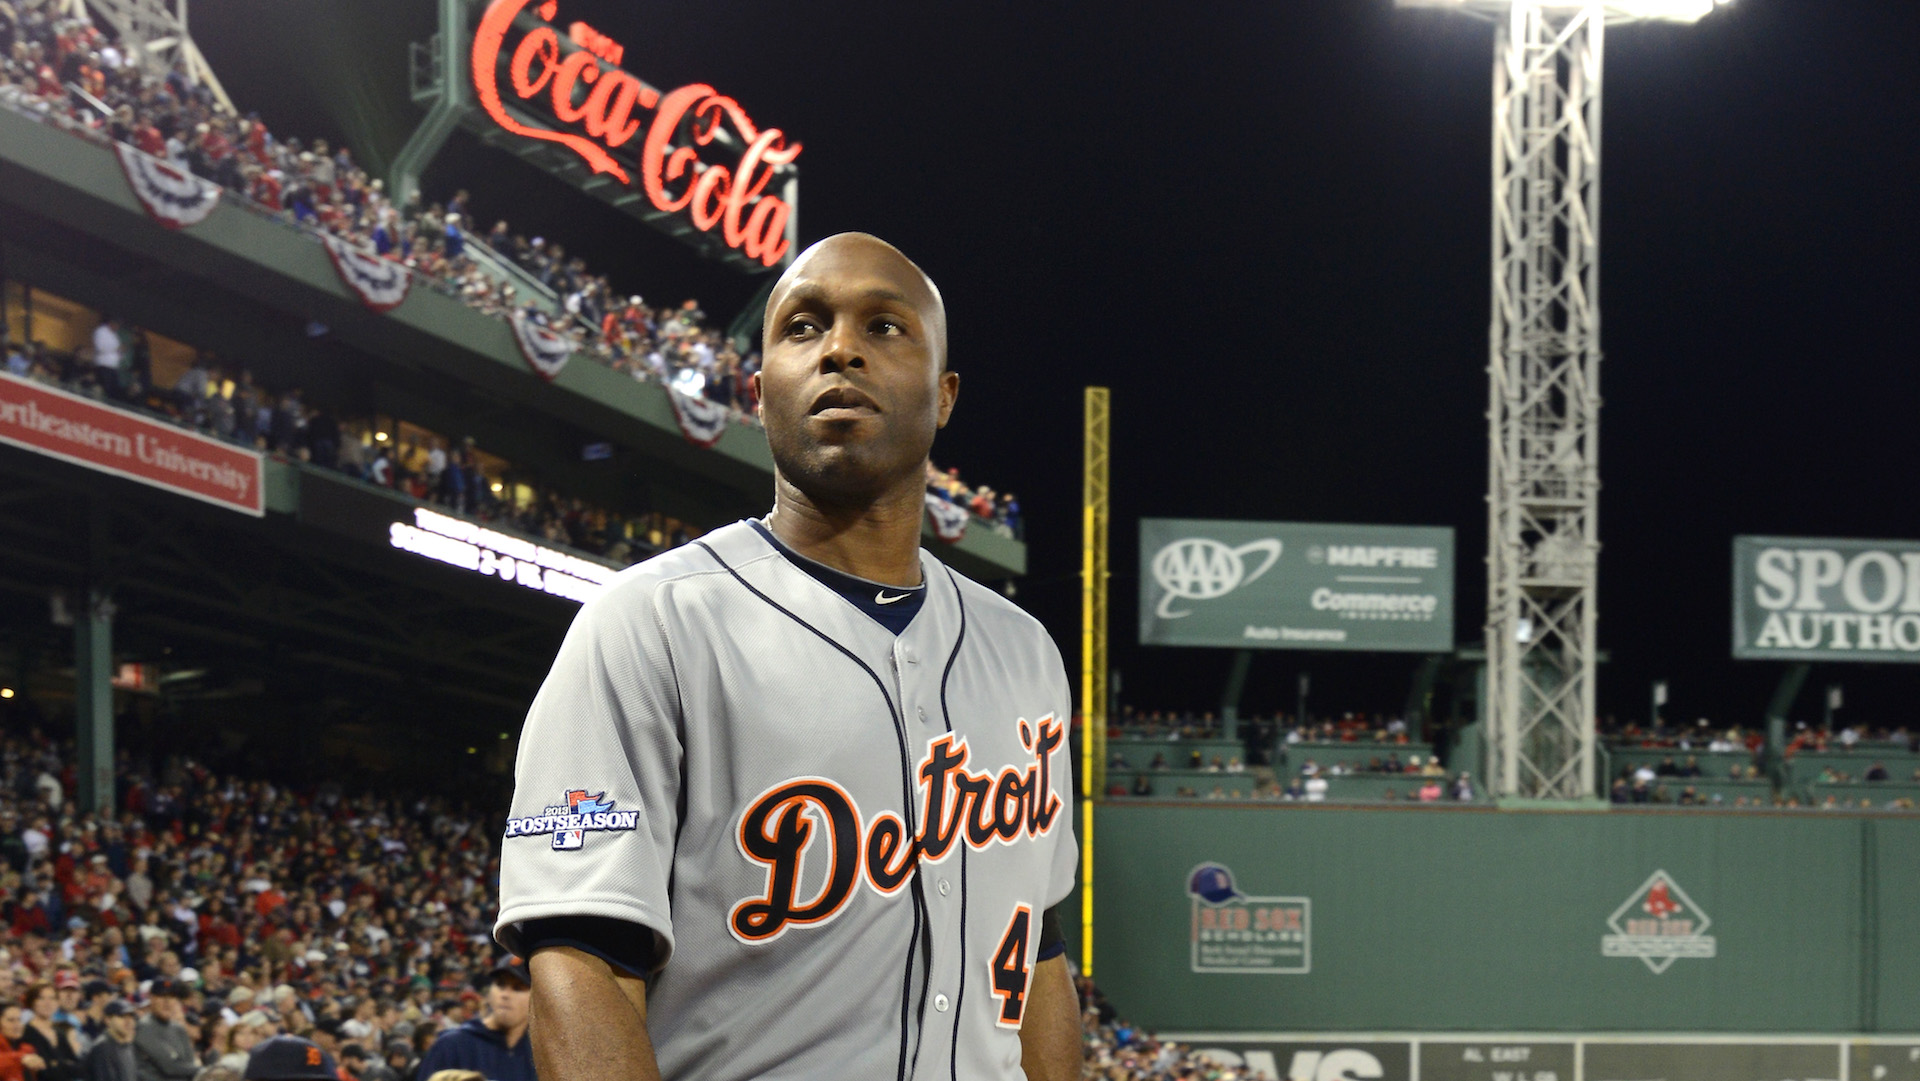 Red Sox on Torii Hunter's Account of Hearing Racial Slurs at Fenway Park:  'This Is Real